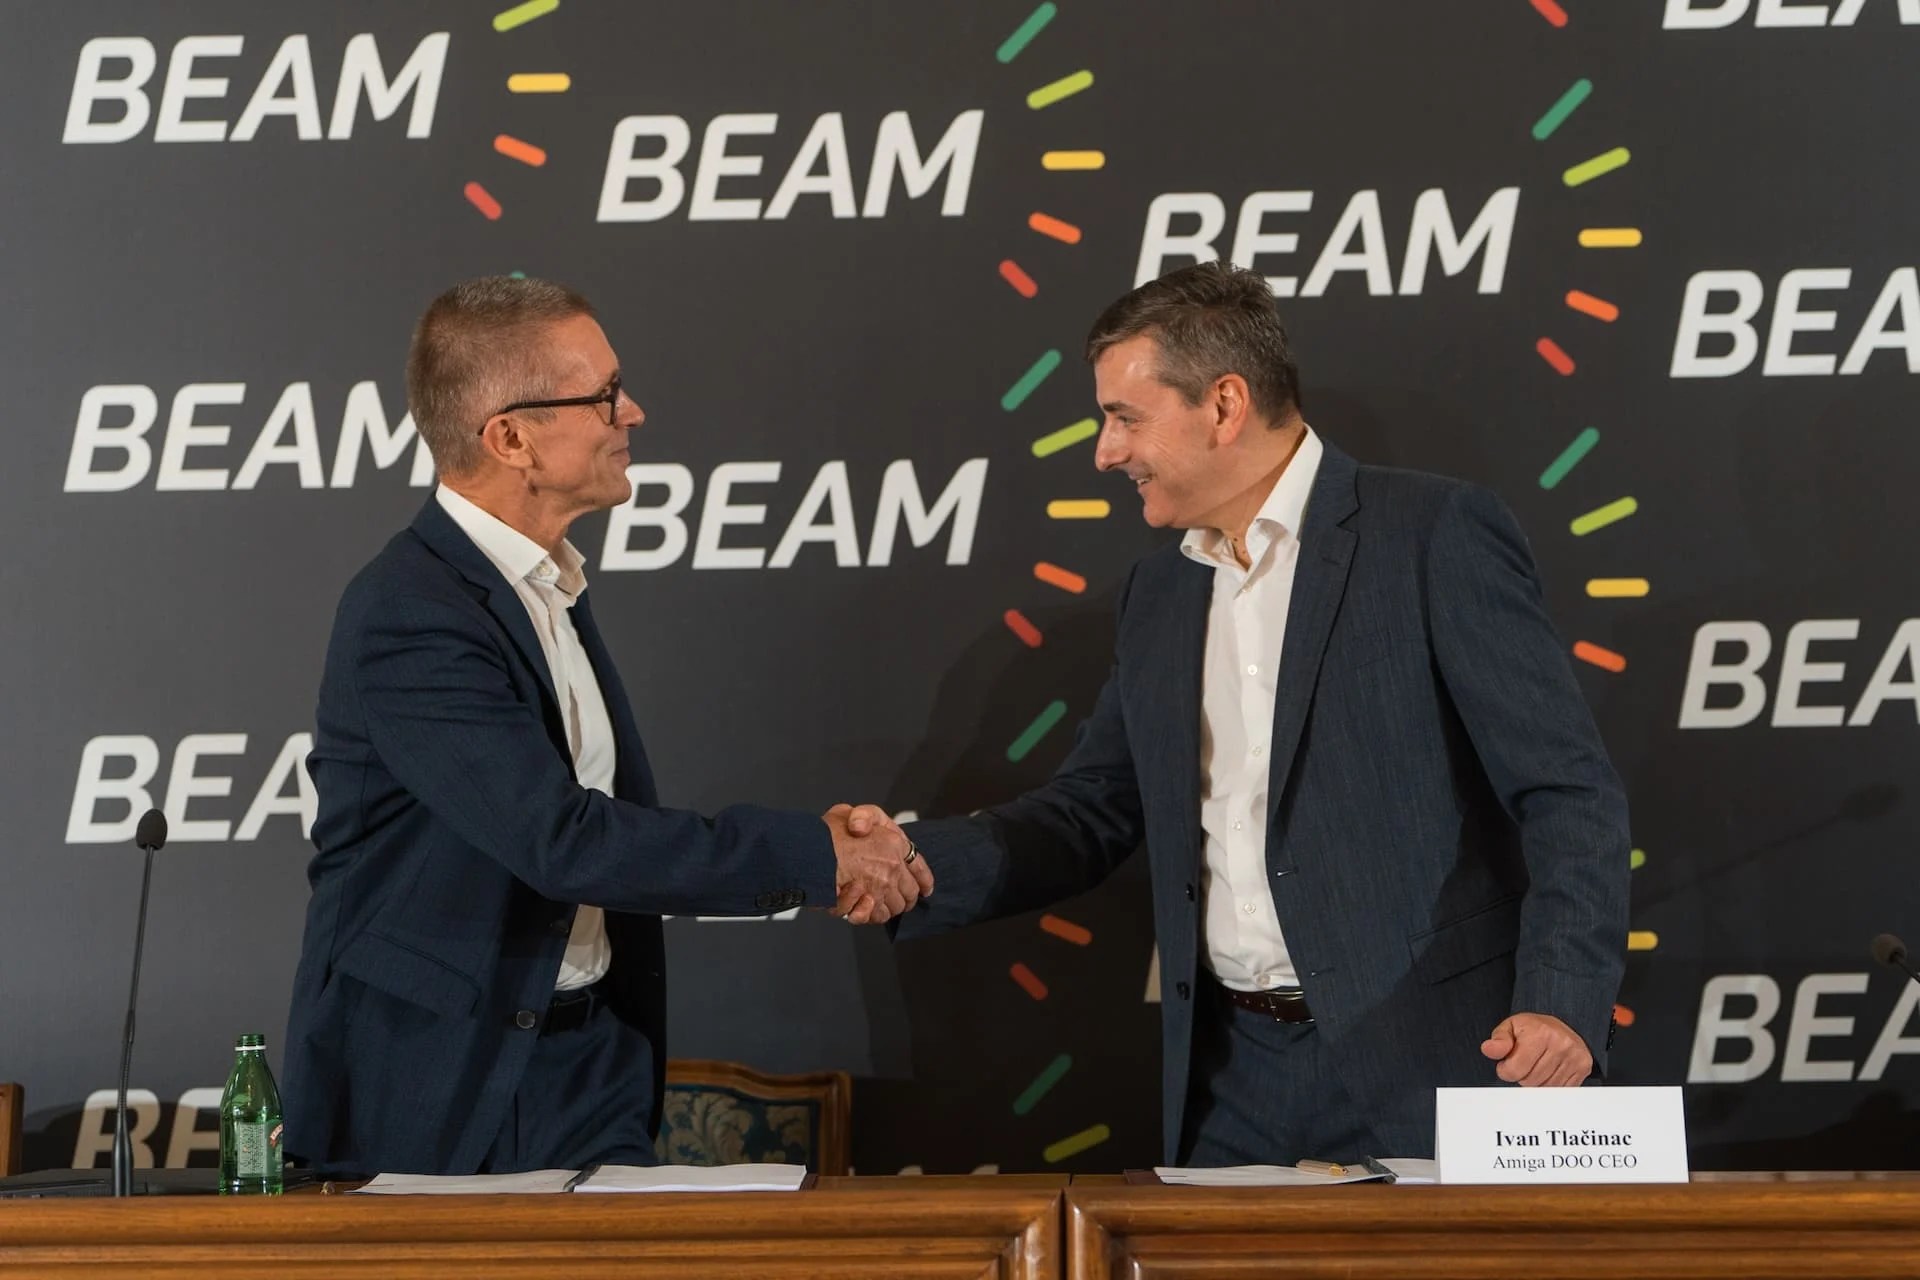 Beam Europe Launched as Beam Global Acquires Amiga in Europe